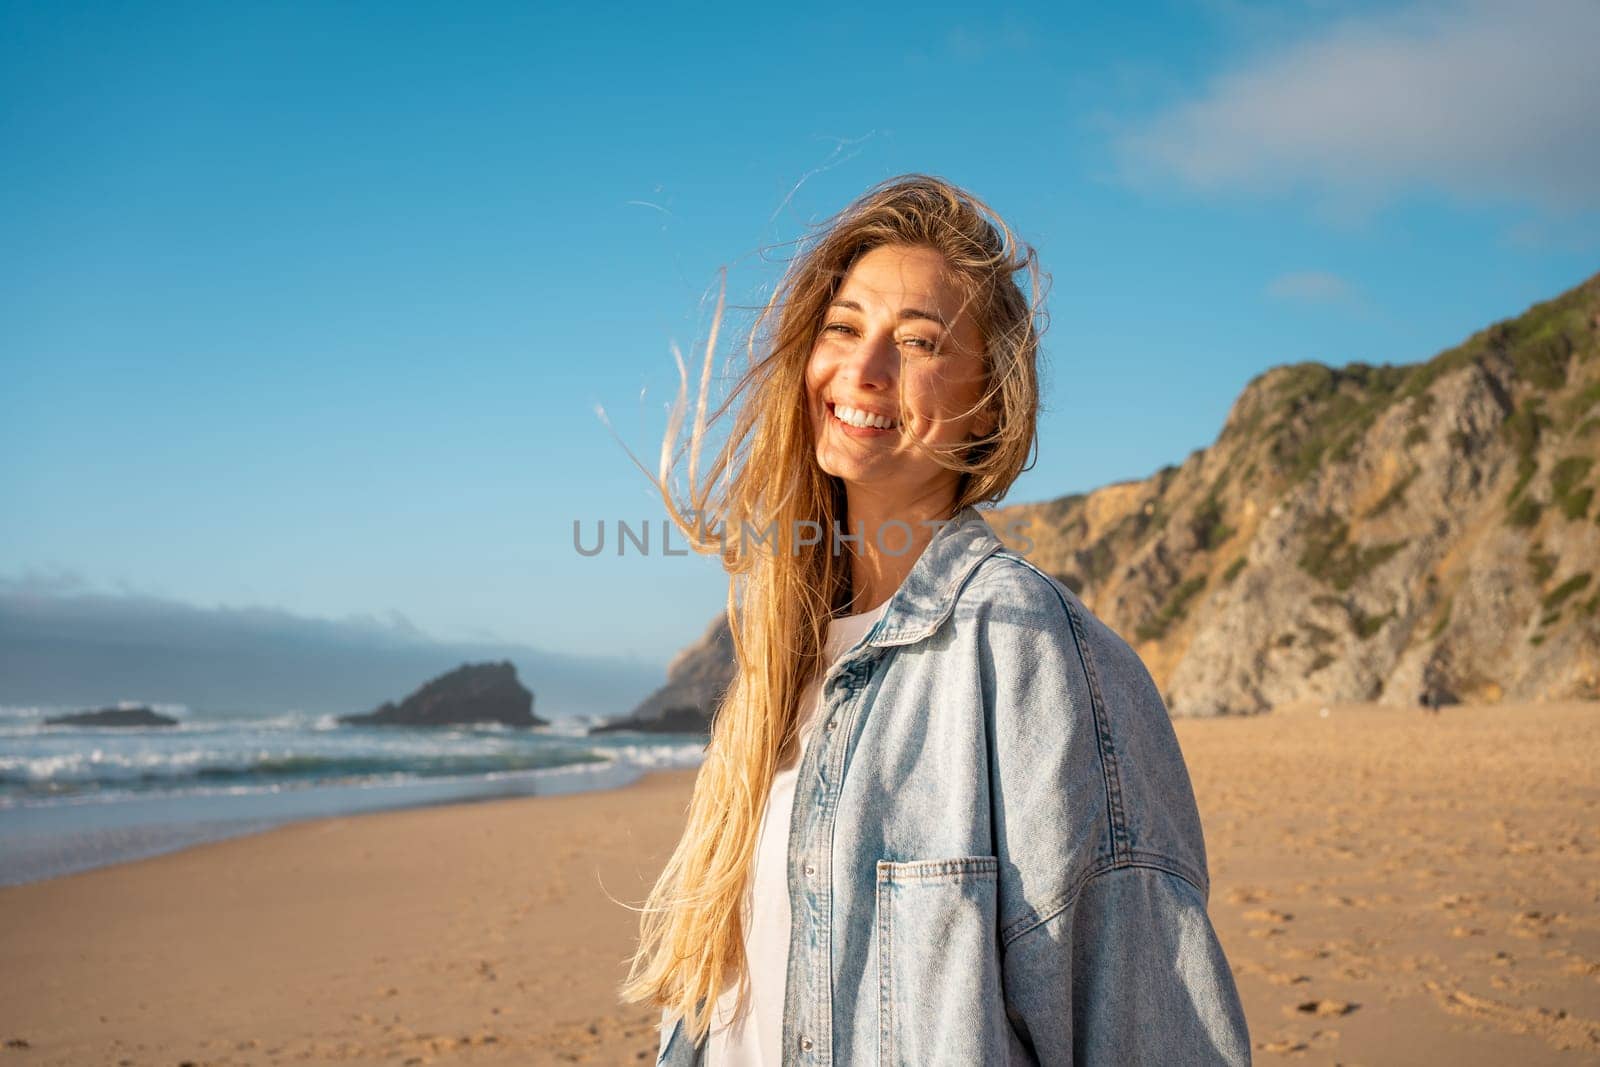 Portrait of smiling woman with long blond hair on sandy beach. Happy female in denim shirt with sea and mountain in background. Lady enjoying vacation against blue sky.